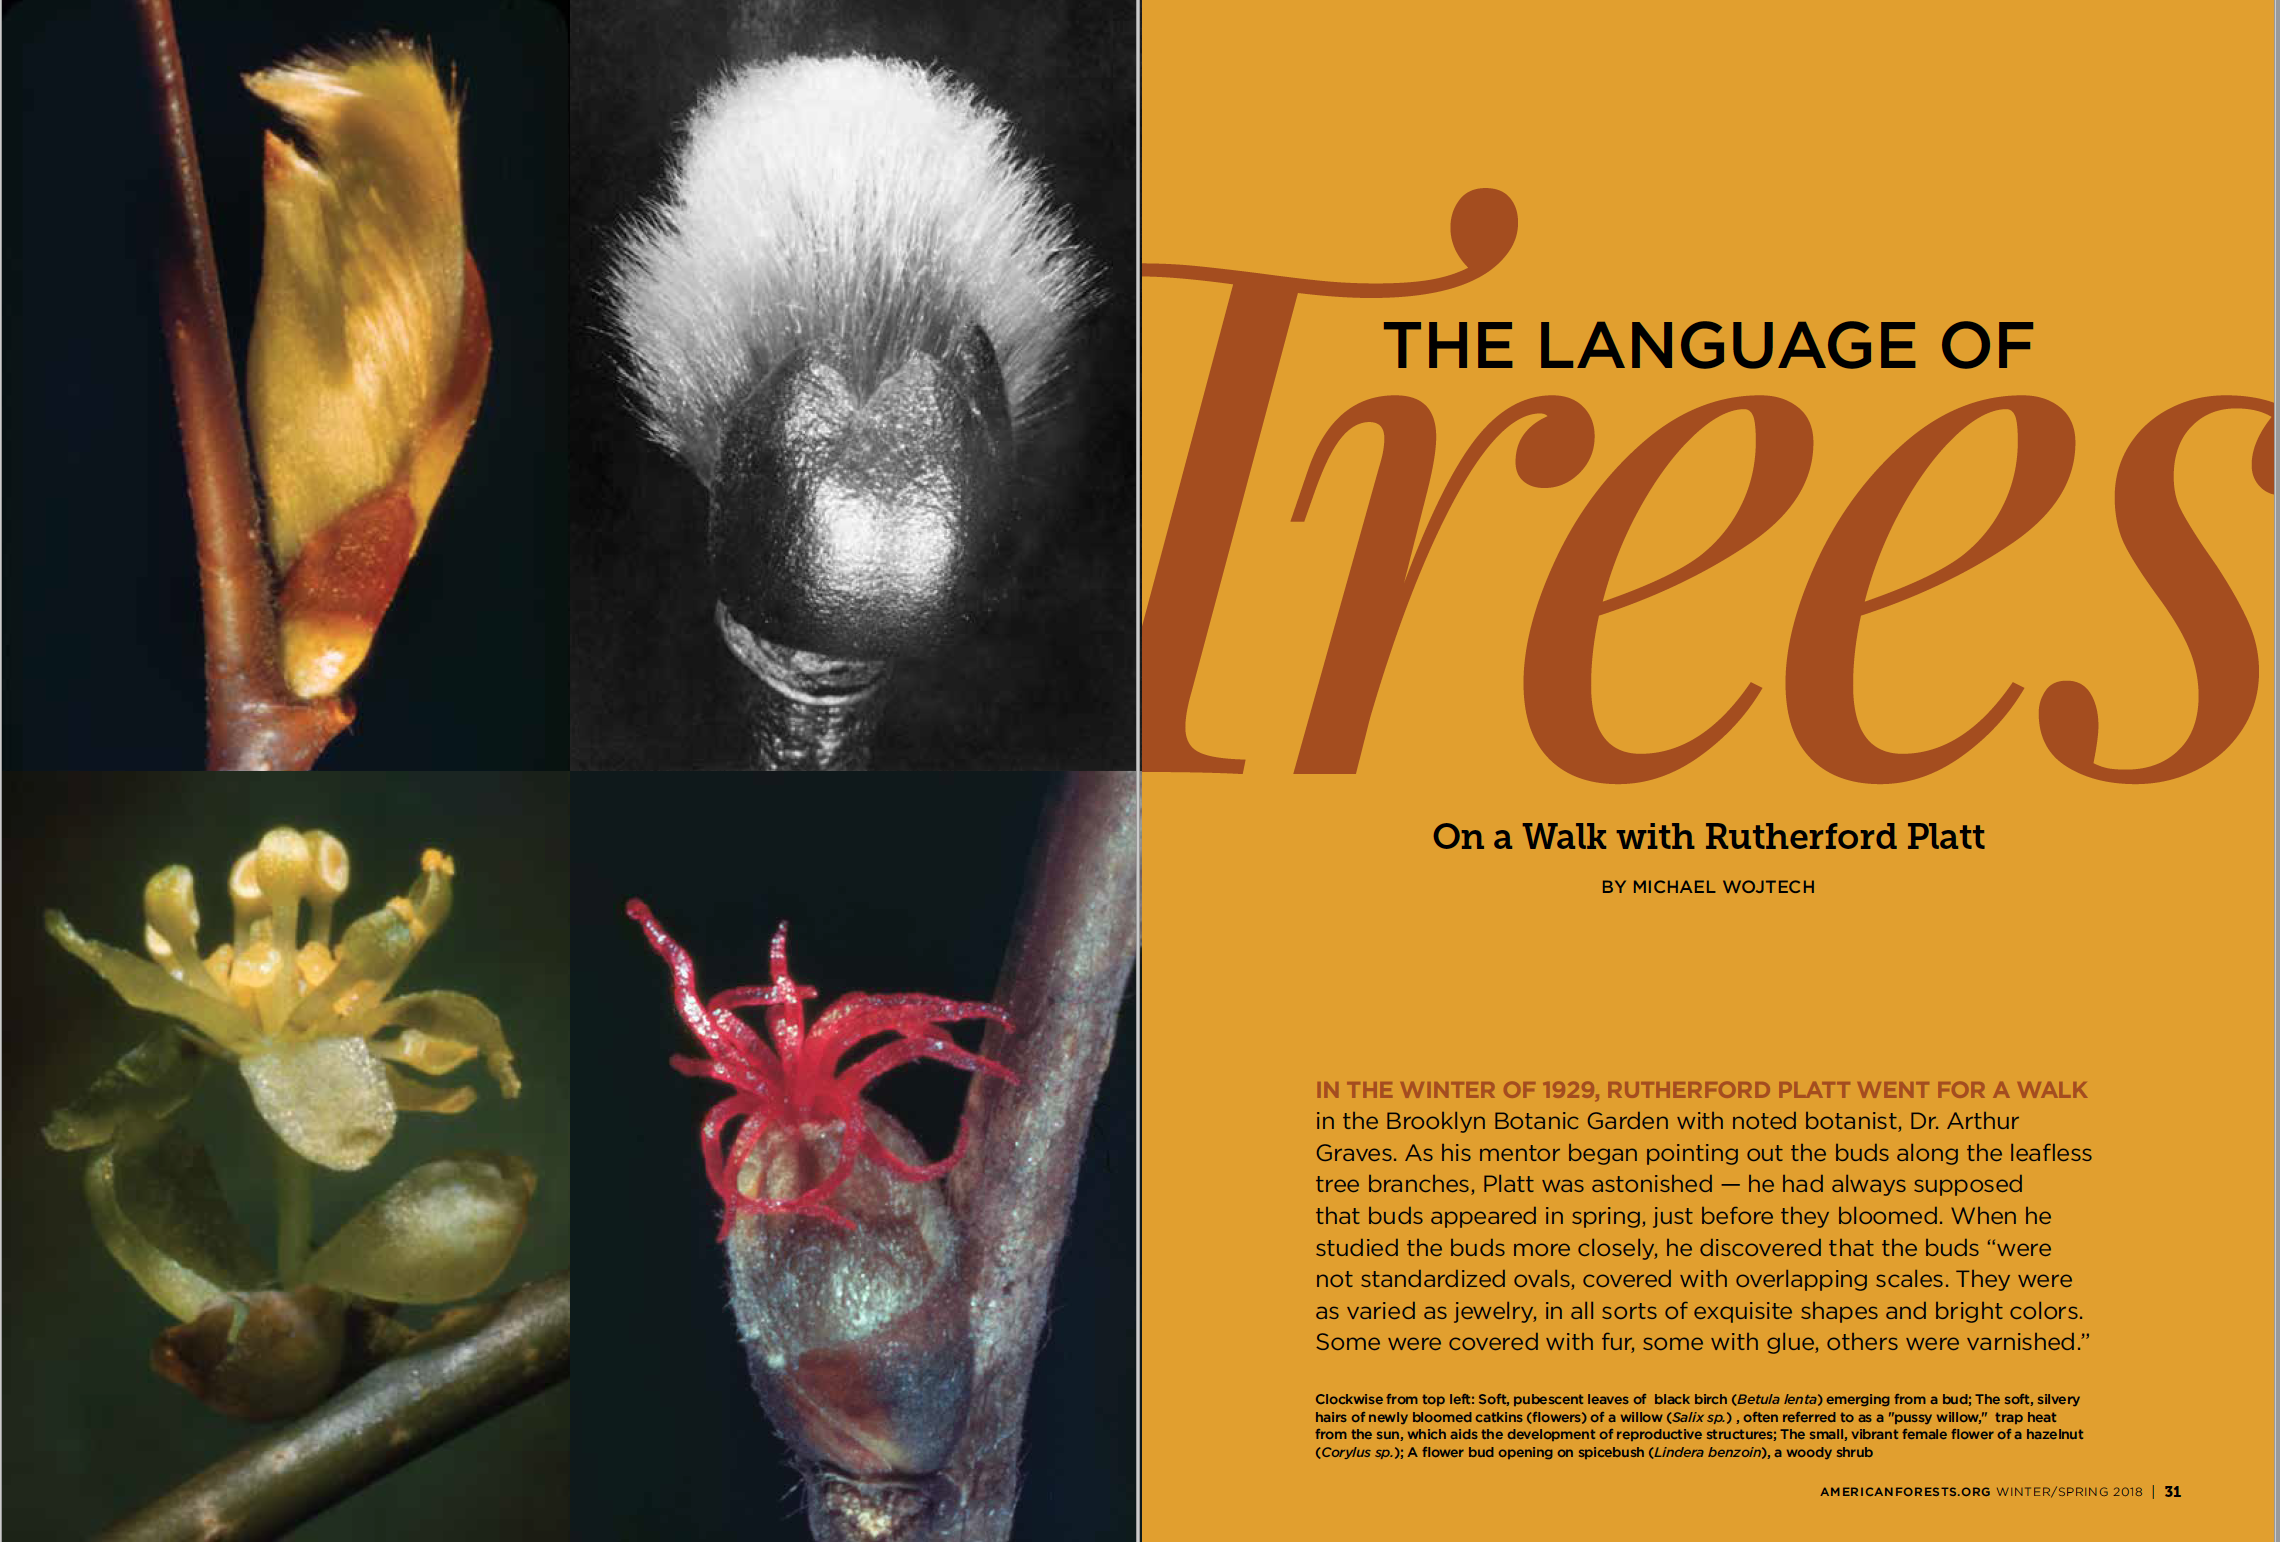 The Language of Trees_Michael Wojtech_American Forests Magazine